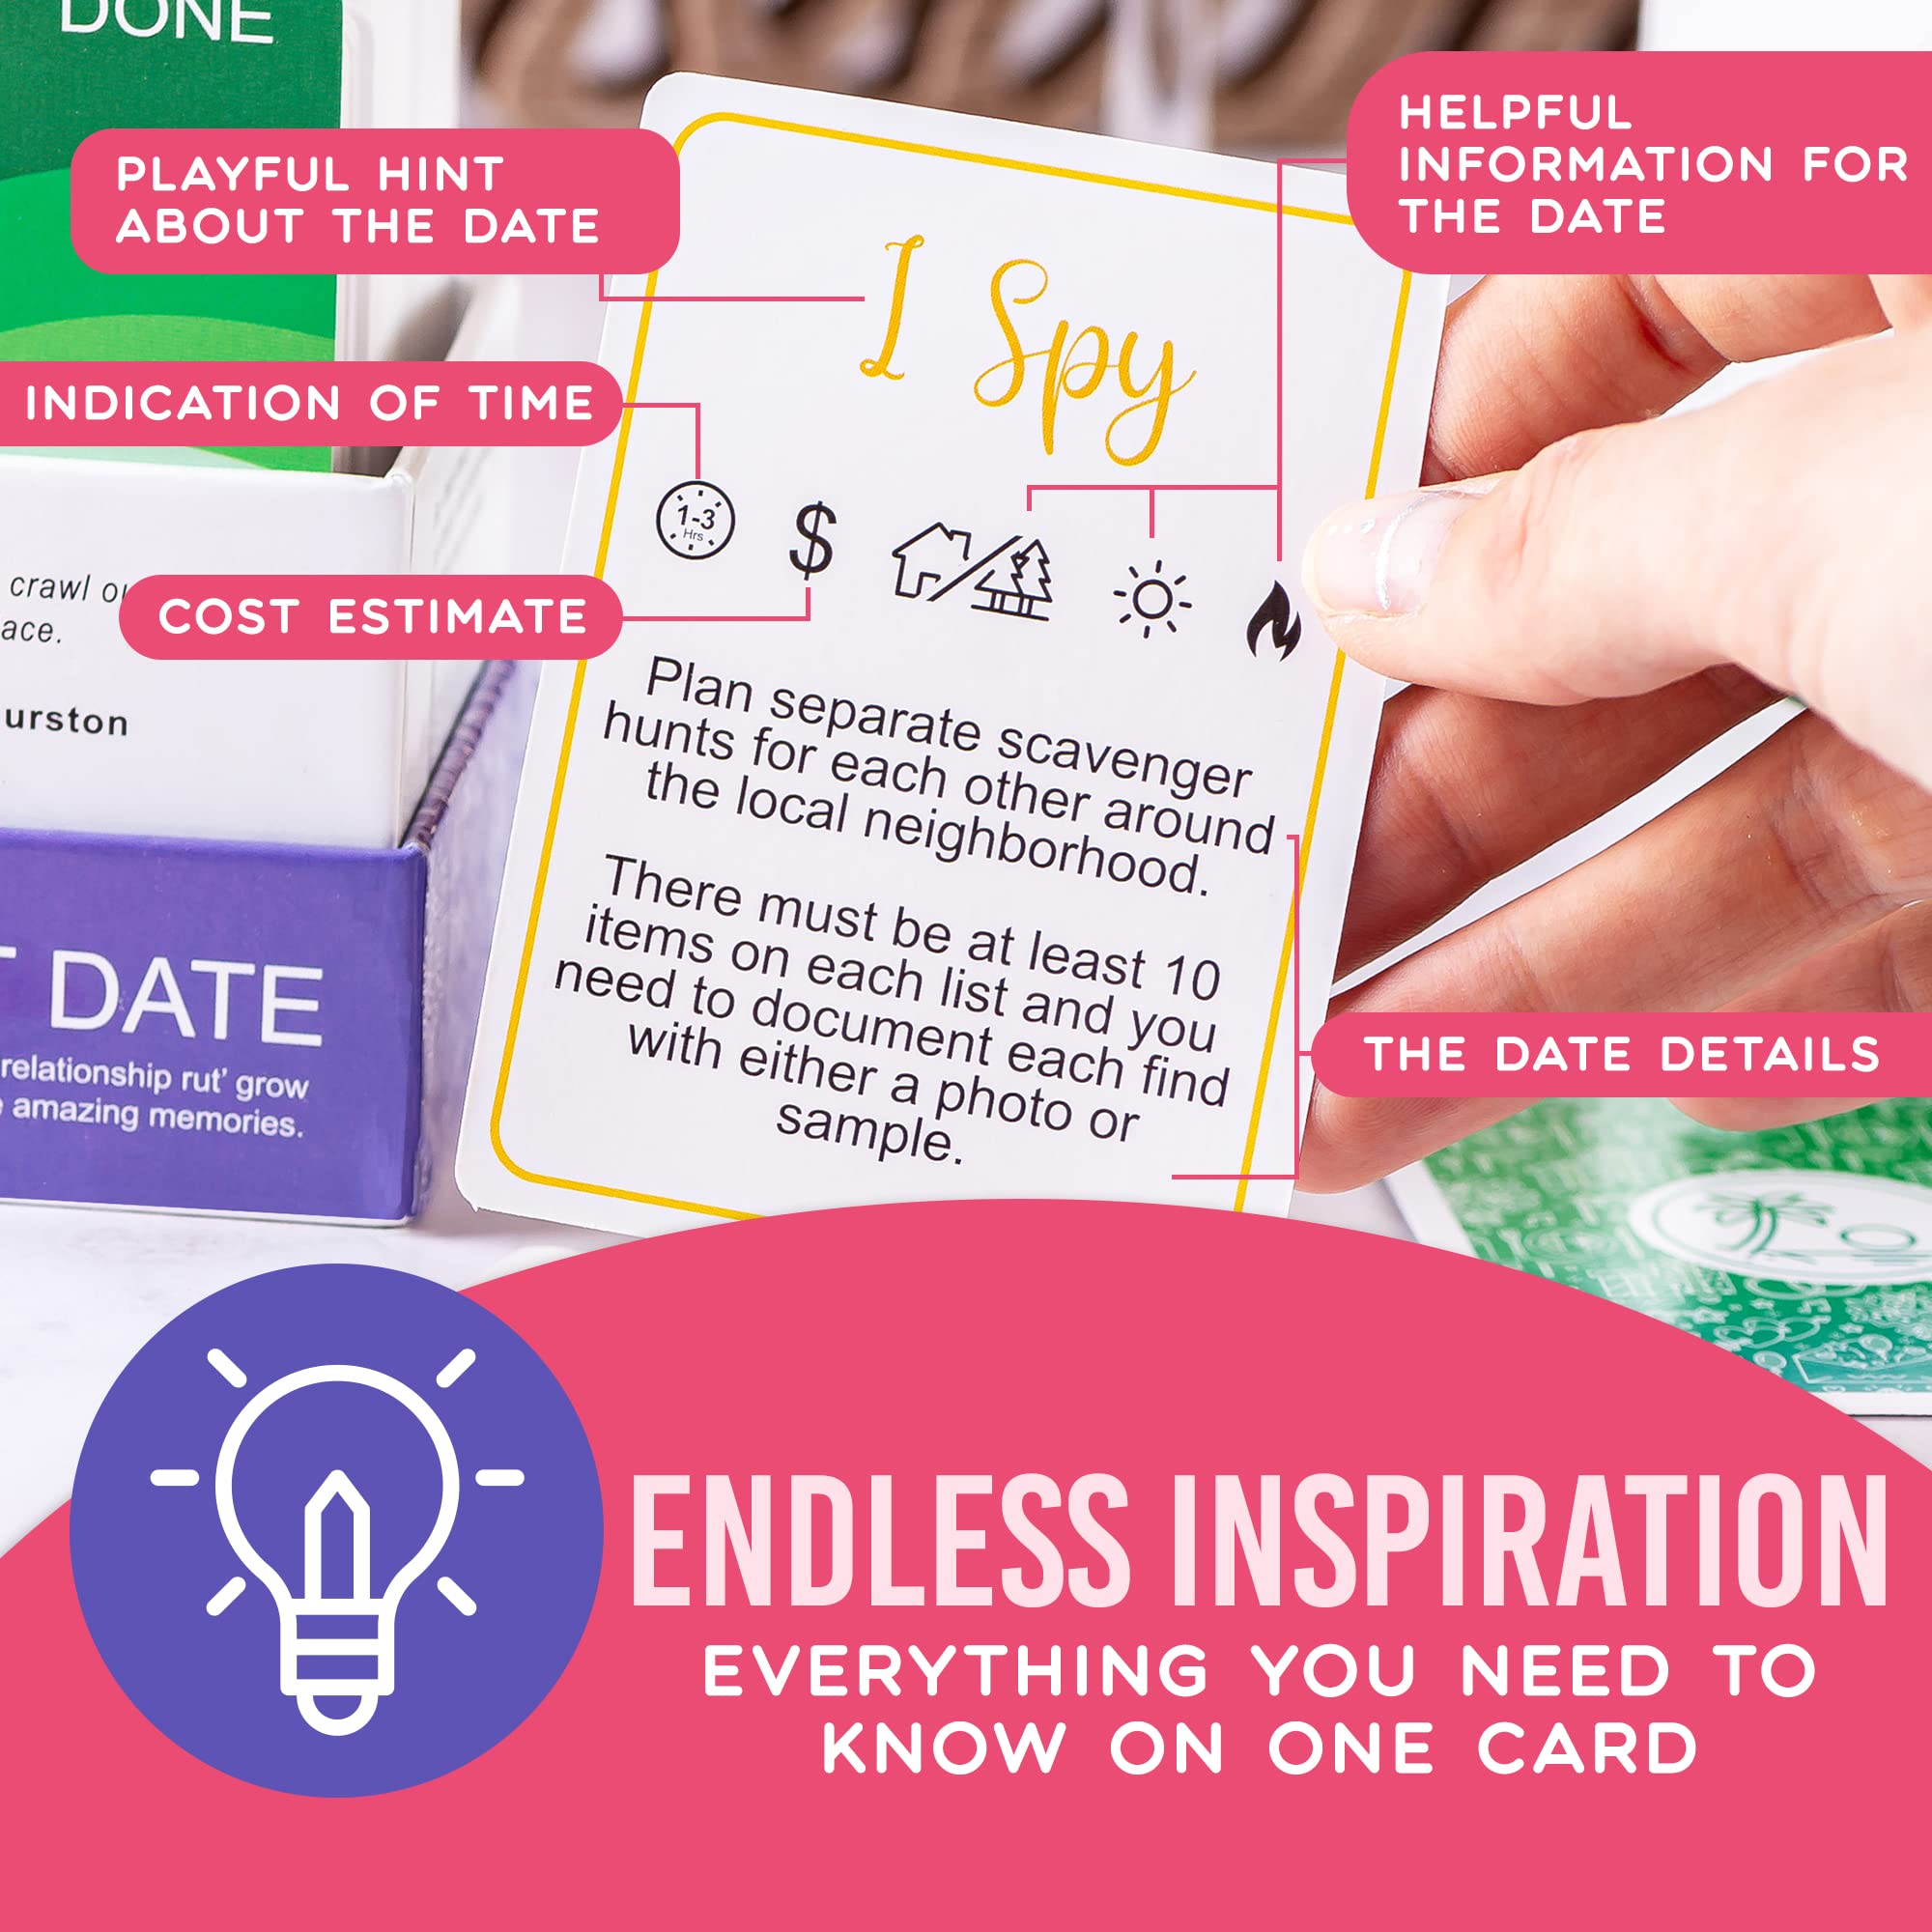 200 Awesome Date Night Ideas - Have Fun and Build Connection with Question Cards, Couples Games and Romantic Adventures - Dating or Married Couples Date Night Kit - Couples Card Games for Adults